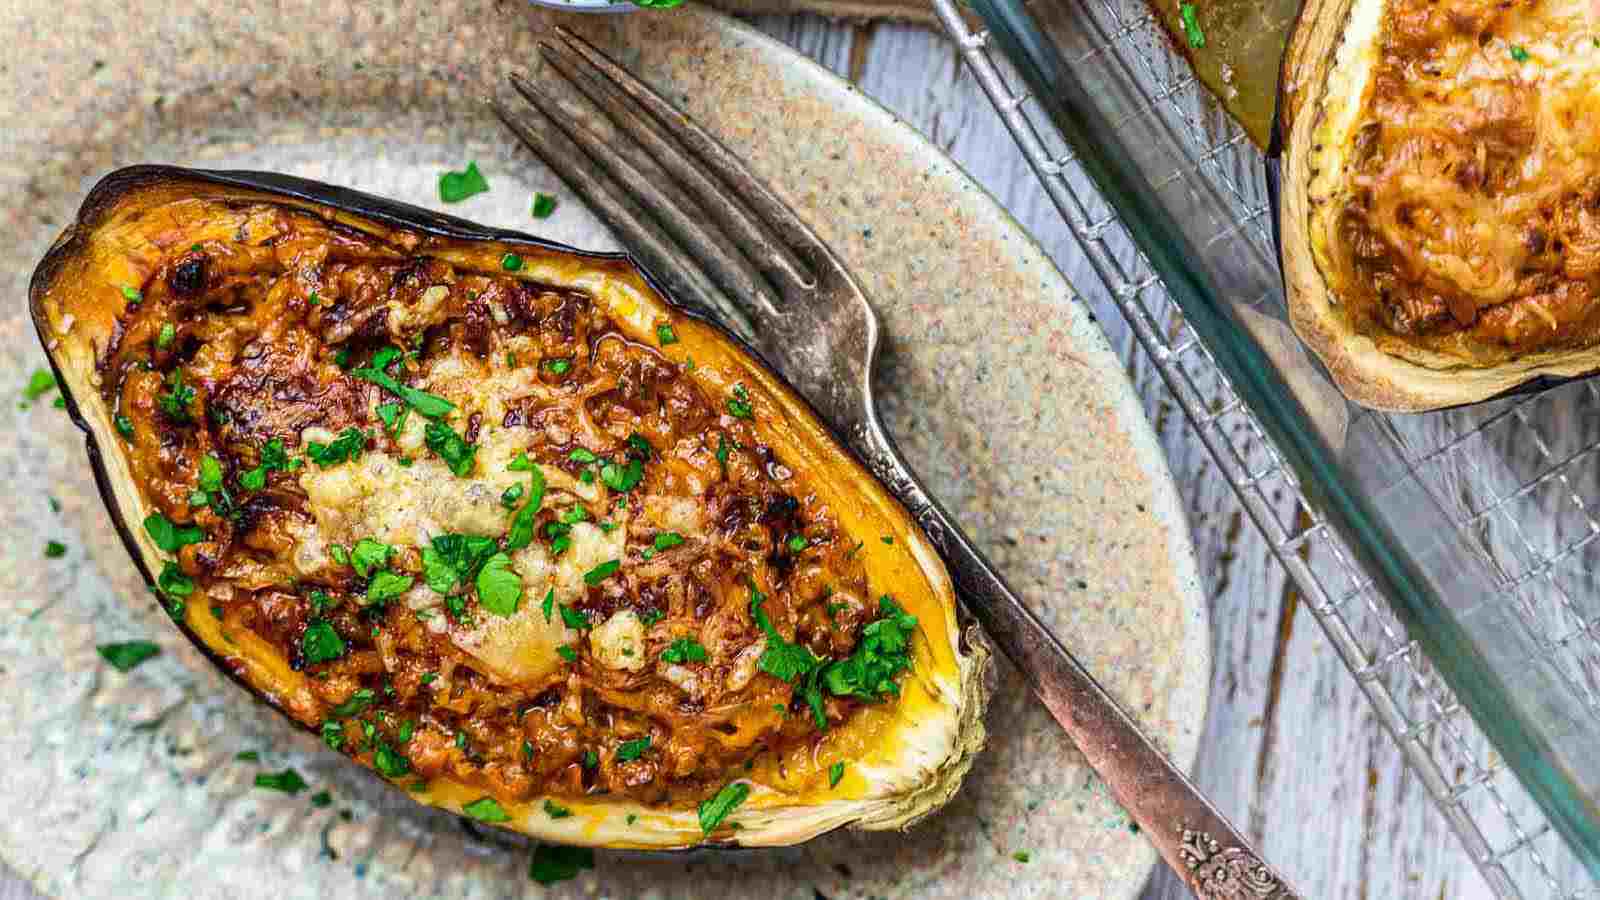 <p>Discover the savory joy of Baked Stuffed Eggplant Boats, a delectable dinner option that’s both flavorful and visually appealing. These eggplant boats are lovingly stuffed with a delicious mixture, creating a harmonious blend of tastes and textures. Whether you’re an eggplant enthusiast or seeking an elegant dinner, these stuffed boats are sure to please your palate.<br><strong>Get the Recipe: </strong><a href="https://www.lowcarb-nocarb.com/keto-stuffed-eggplant/?utm_source=msn&utm_medium=page&utm_campaign=Your%20title%20here:%20it%20should%20be%2055-60%20characters,%20ideally">Baked Stuffed Eggplant Boats</a></p>